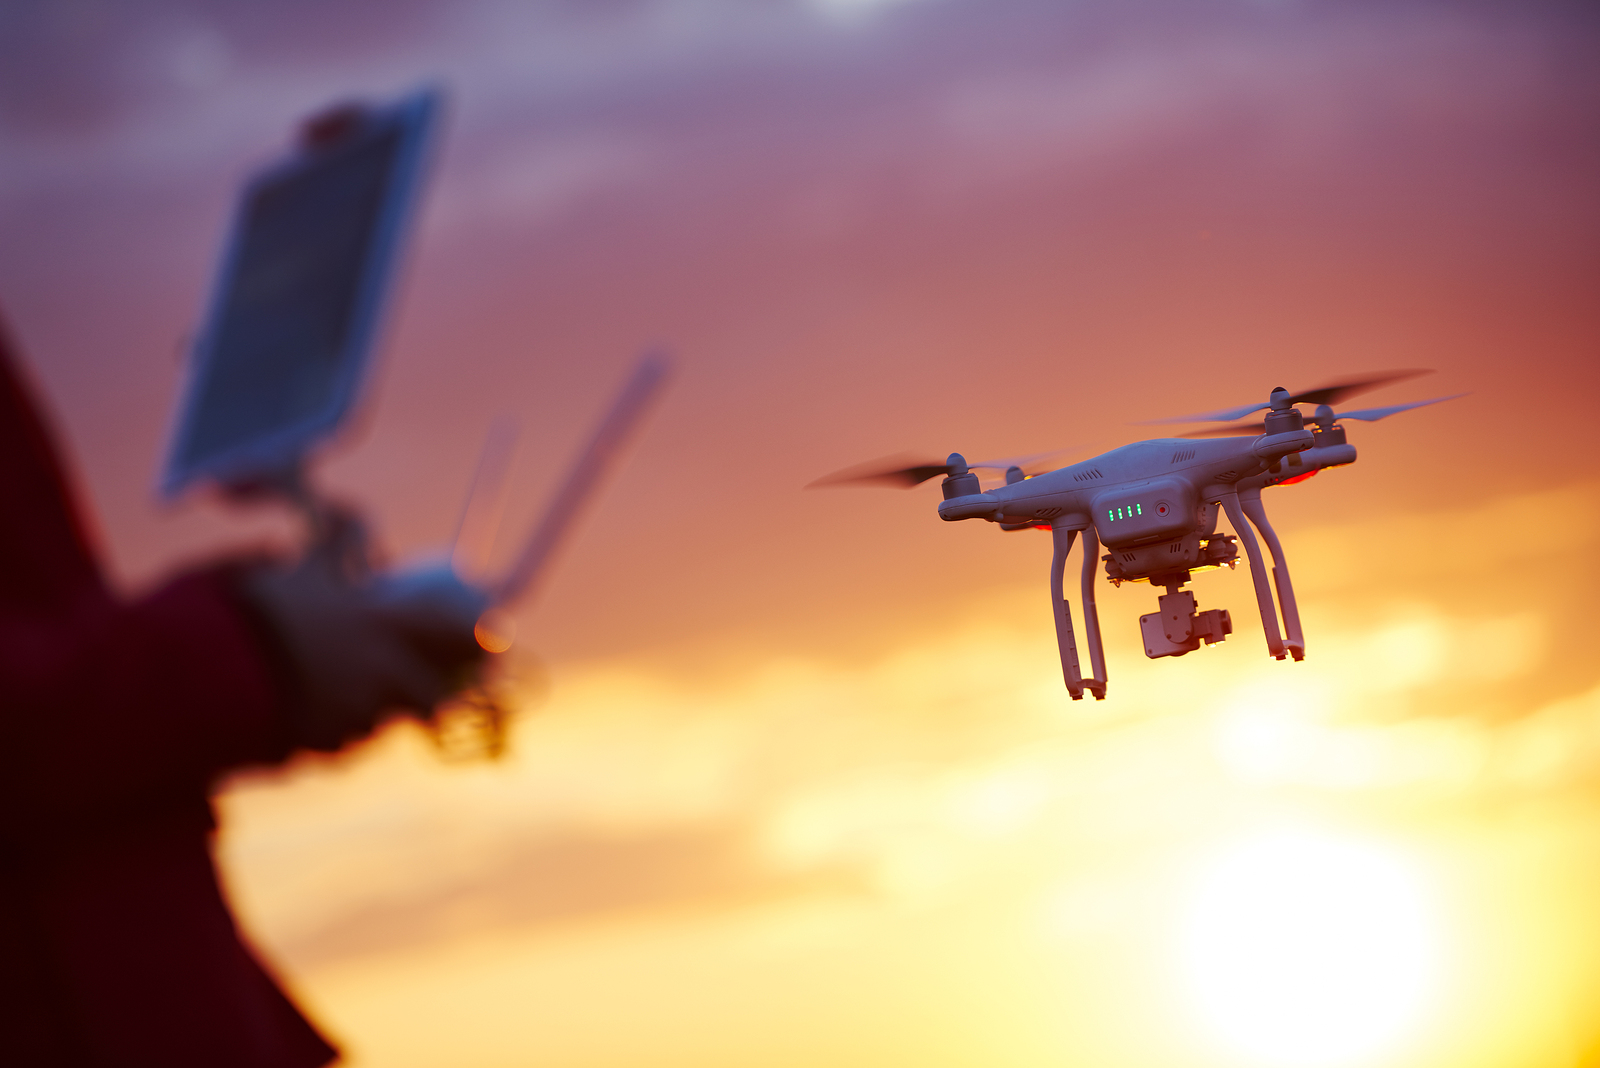 DJI & Edgybees, a Cinderella Story: Corporations Giving Startups a Step Up